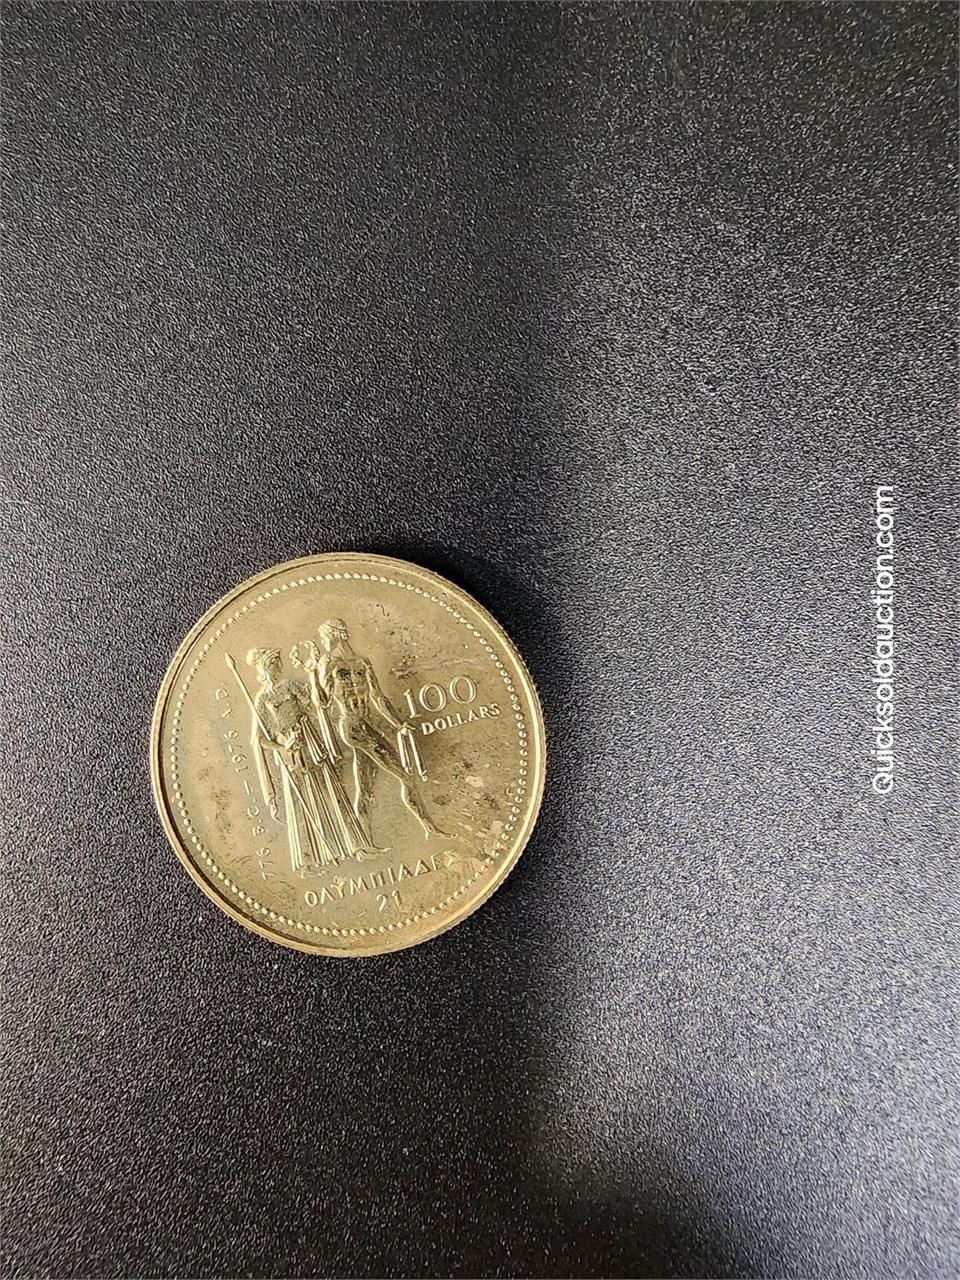 Olympic Gold Coin  776 BC-1976 $100 Dollars